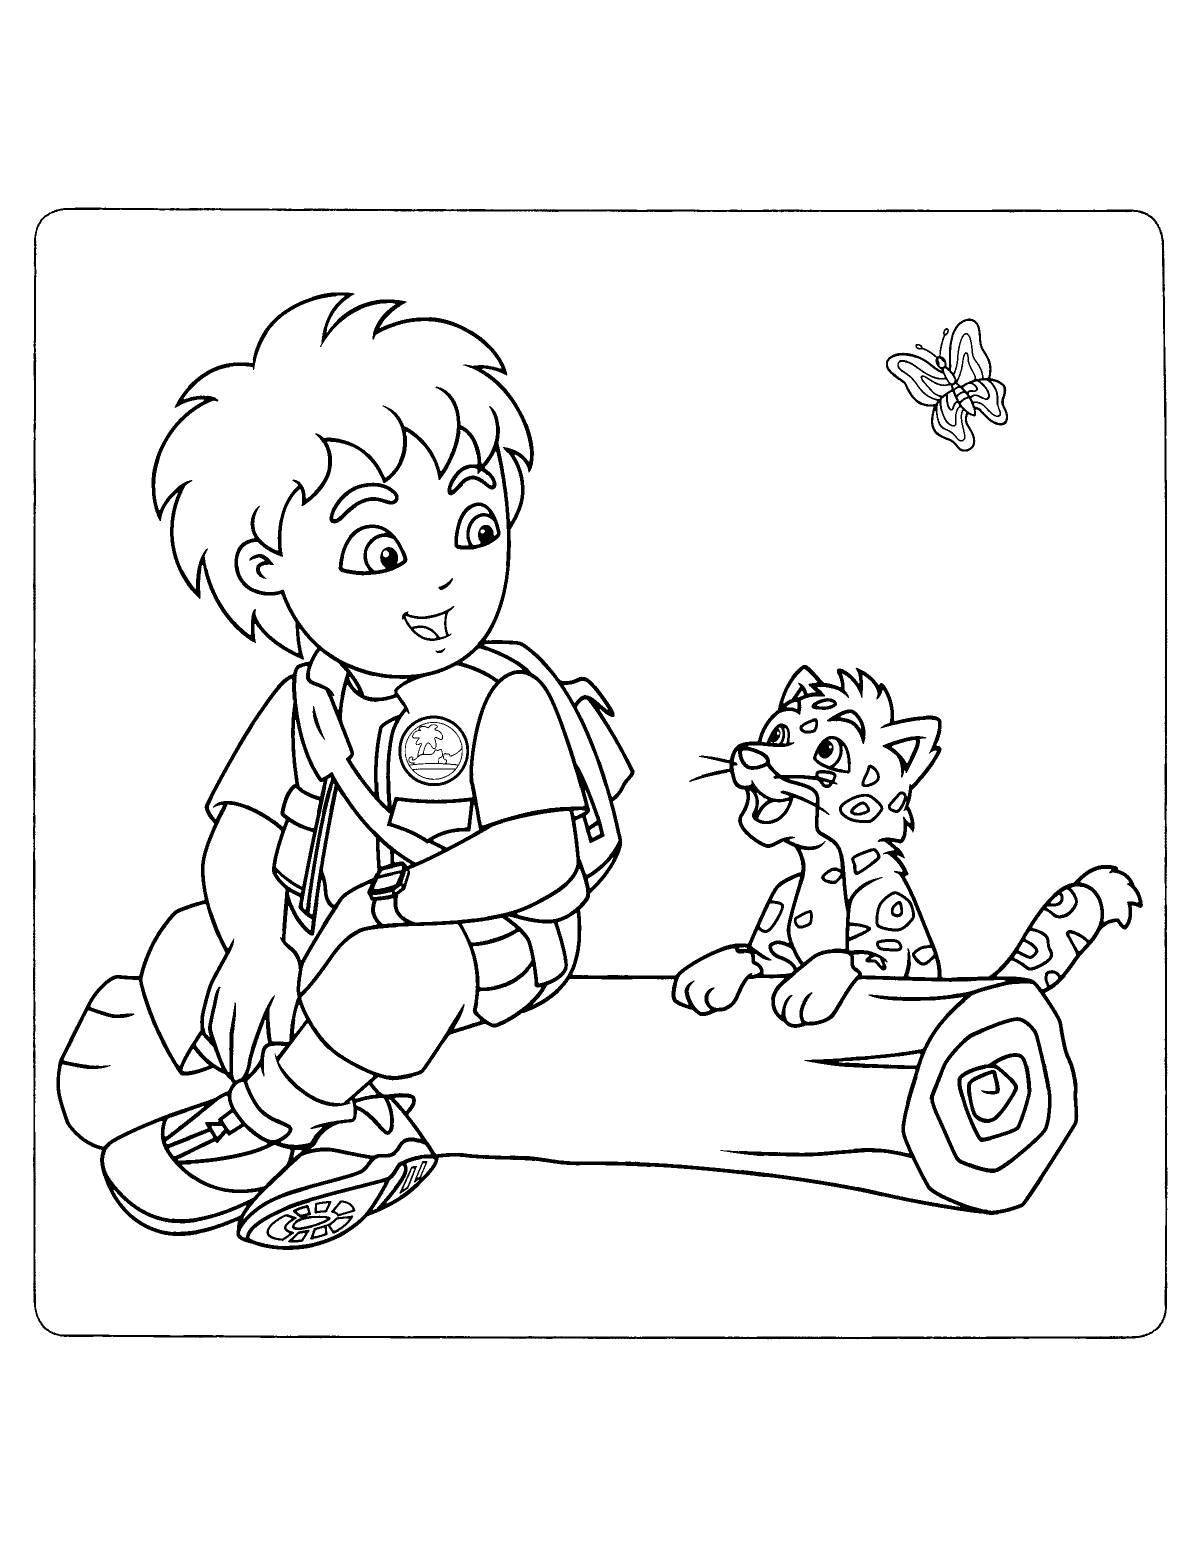 Diego Go's amazing coloring page